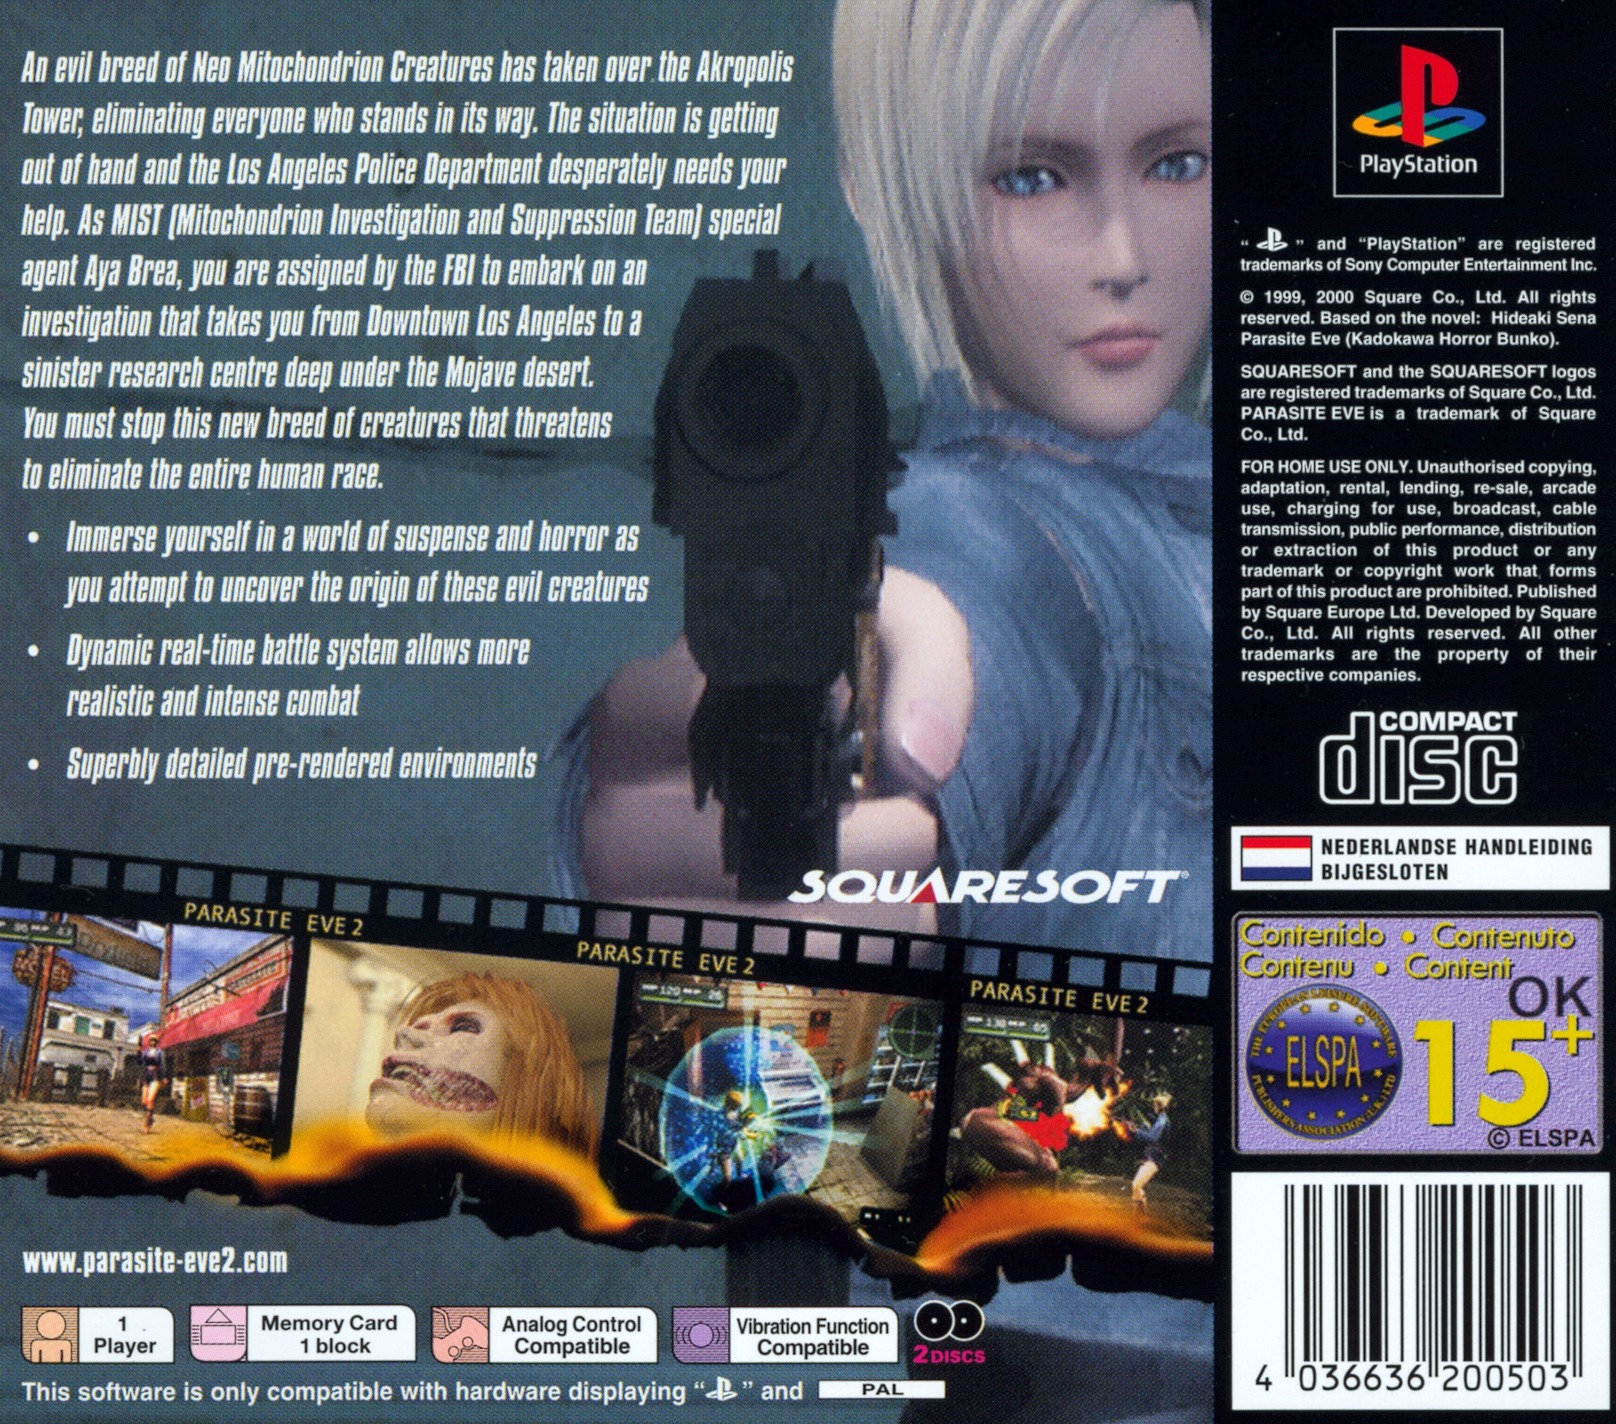 Parasite Eve II 2 Sony Playstation PSX PS1 PAL NI for sale online